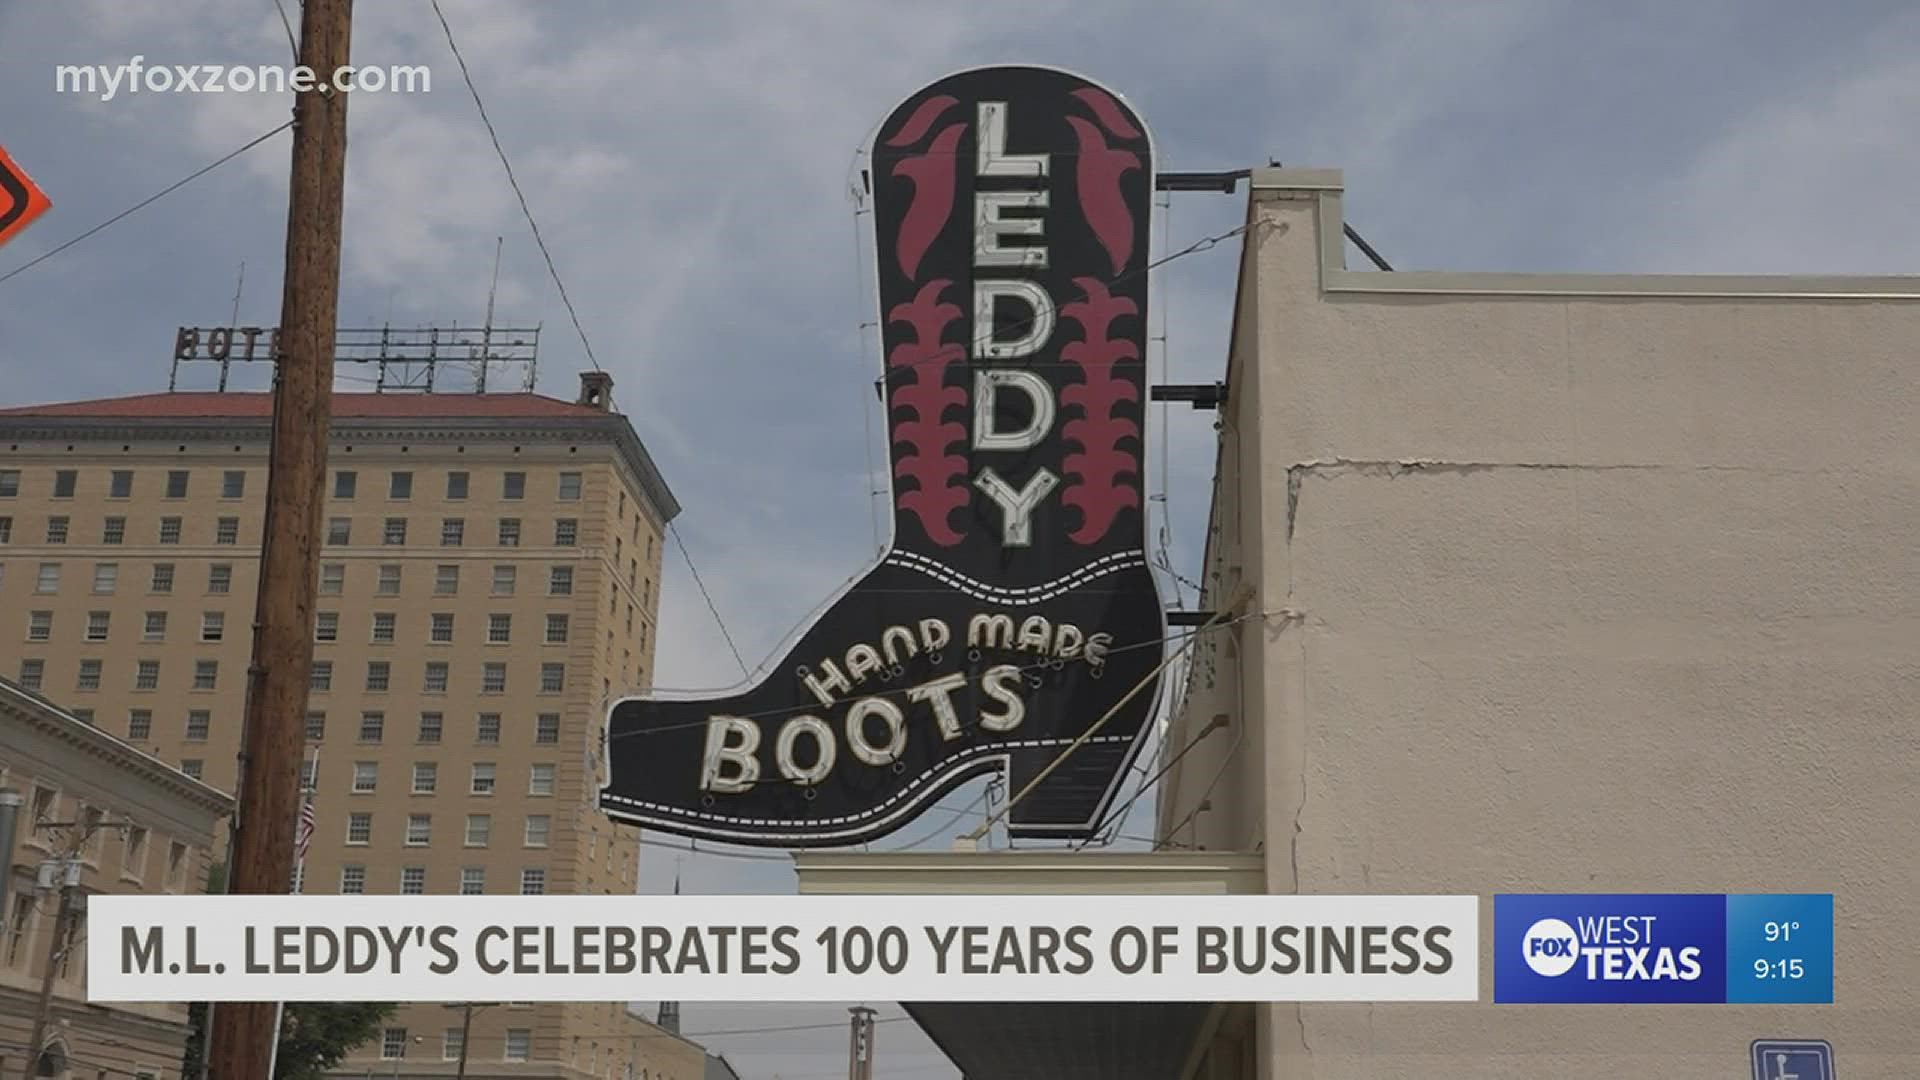 M.L. Leddy’s has earned an international reputation for quality, handmade boots and custom products.